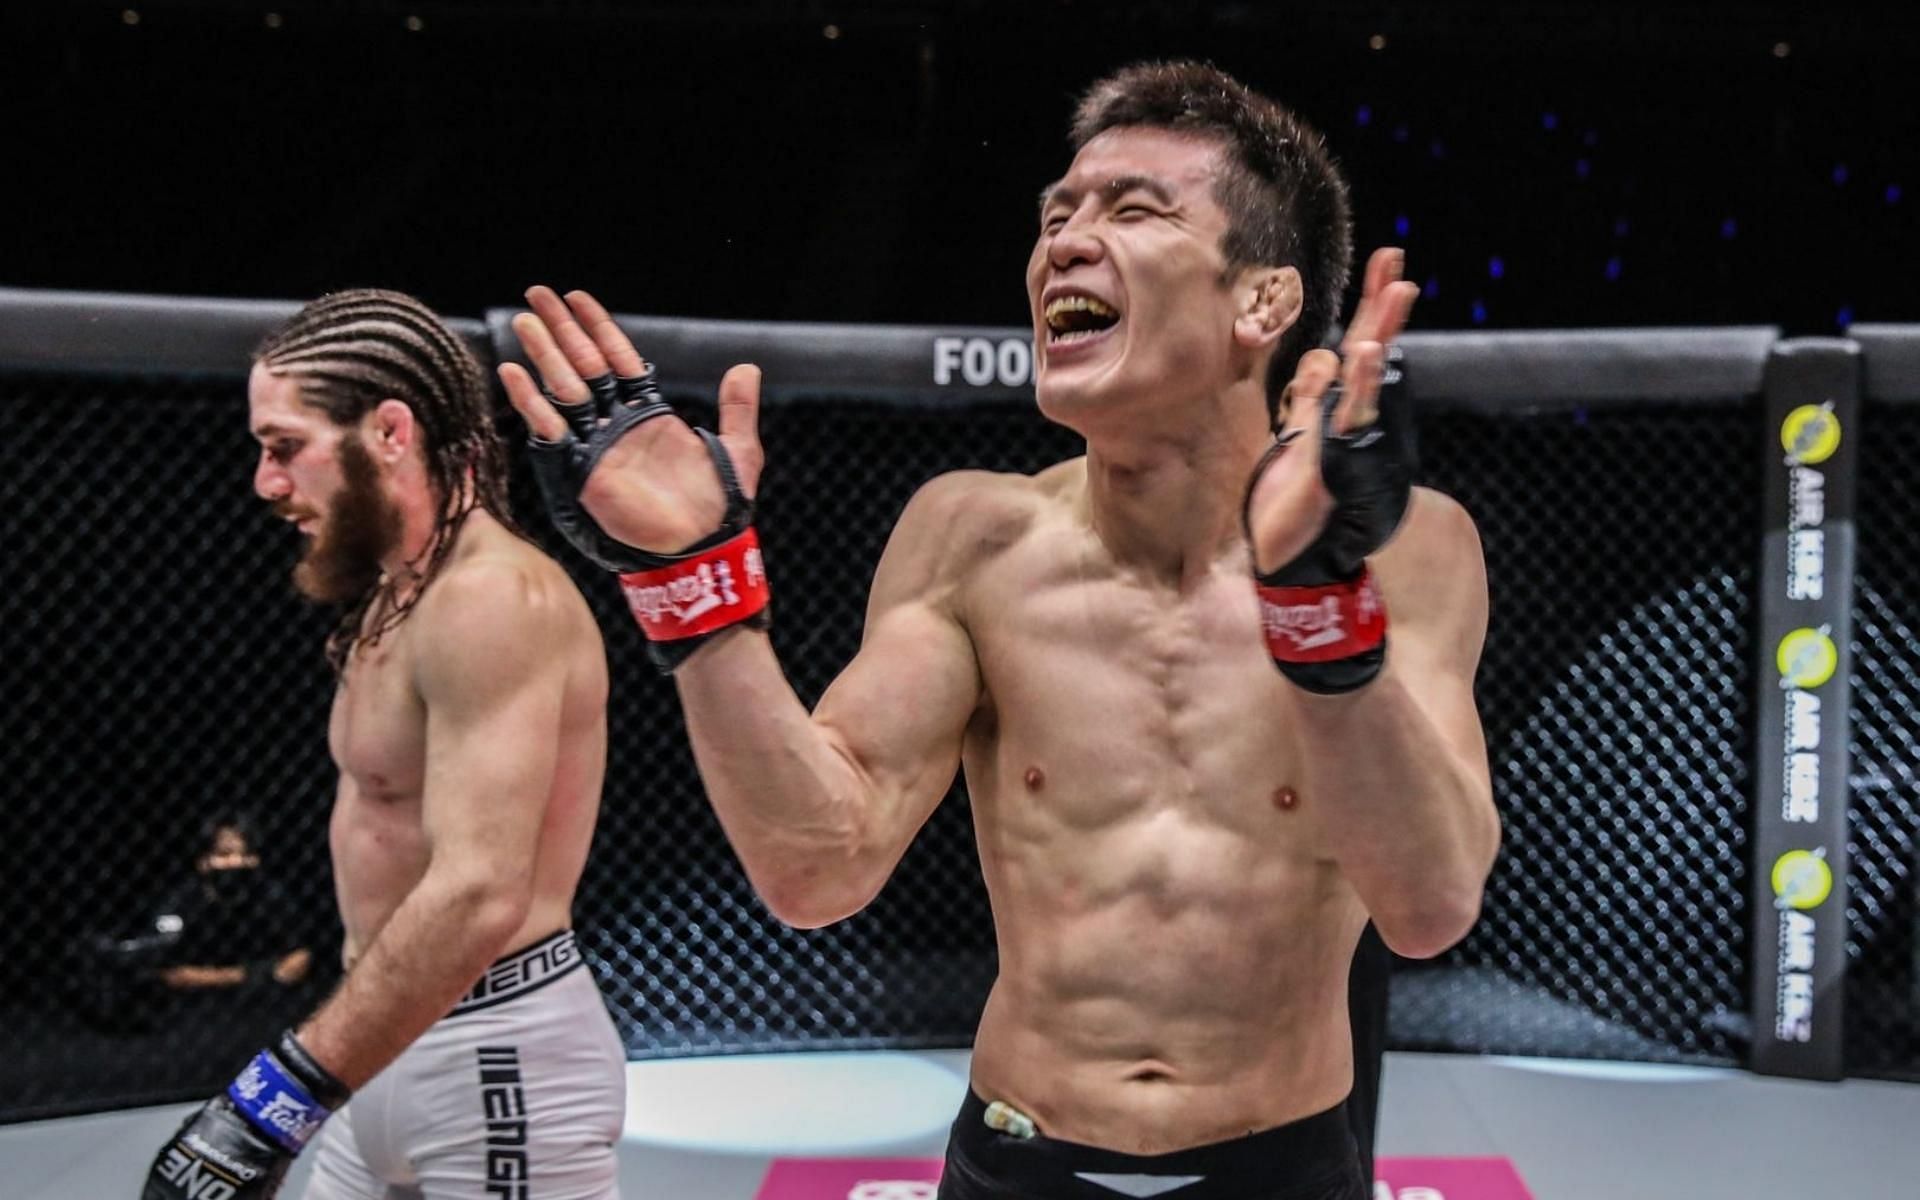 Japanese MMA legend Shinya Aoki (right) has had his fair share of crazy moments in and out of the cage. (Image courtesy of ONE Championship)